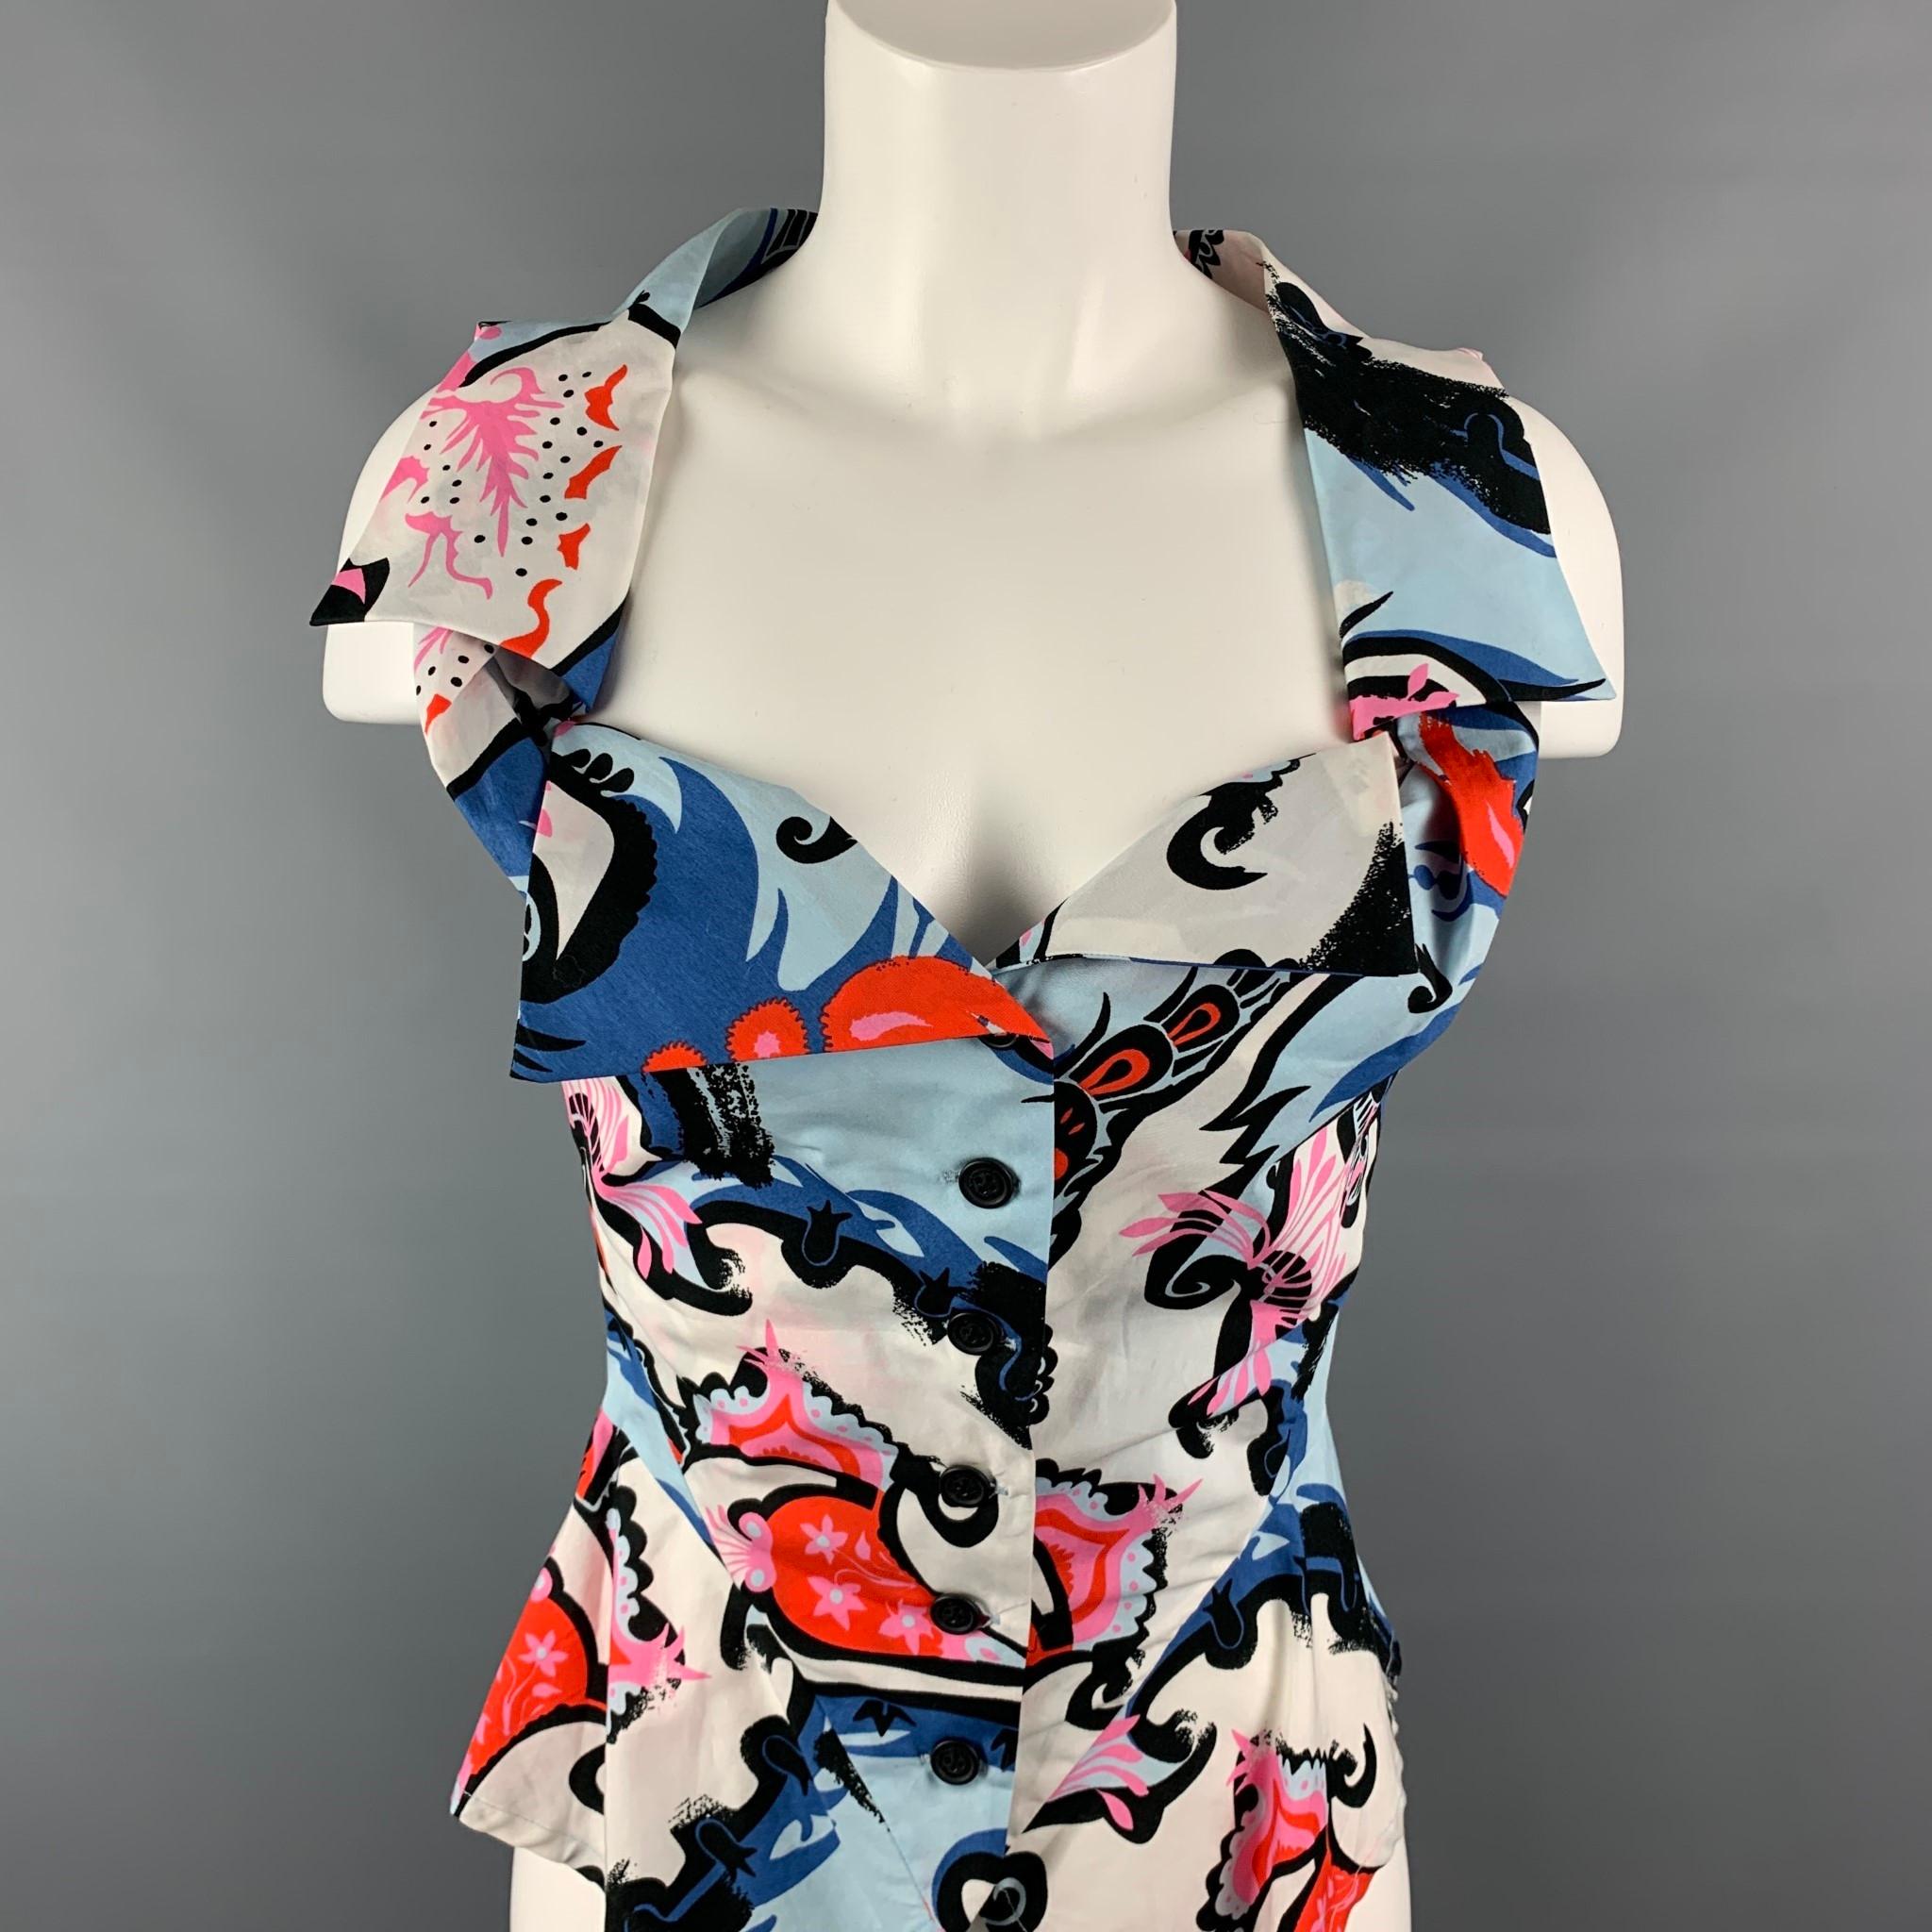 VIVIENNE WESTWOOD ANGLOMANIA blouse comes in a multi-color abstract cotton featuring peplum style, wide collar neck-line, and a buttoned closure. Made in Italy. 

Very Good Pre-Owned Condition.
Marked: 40

Measurements:

Shoulder: 14 in.
Bust: 30